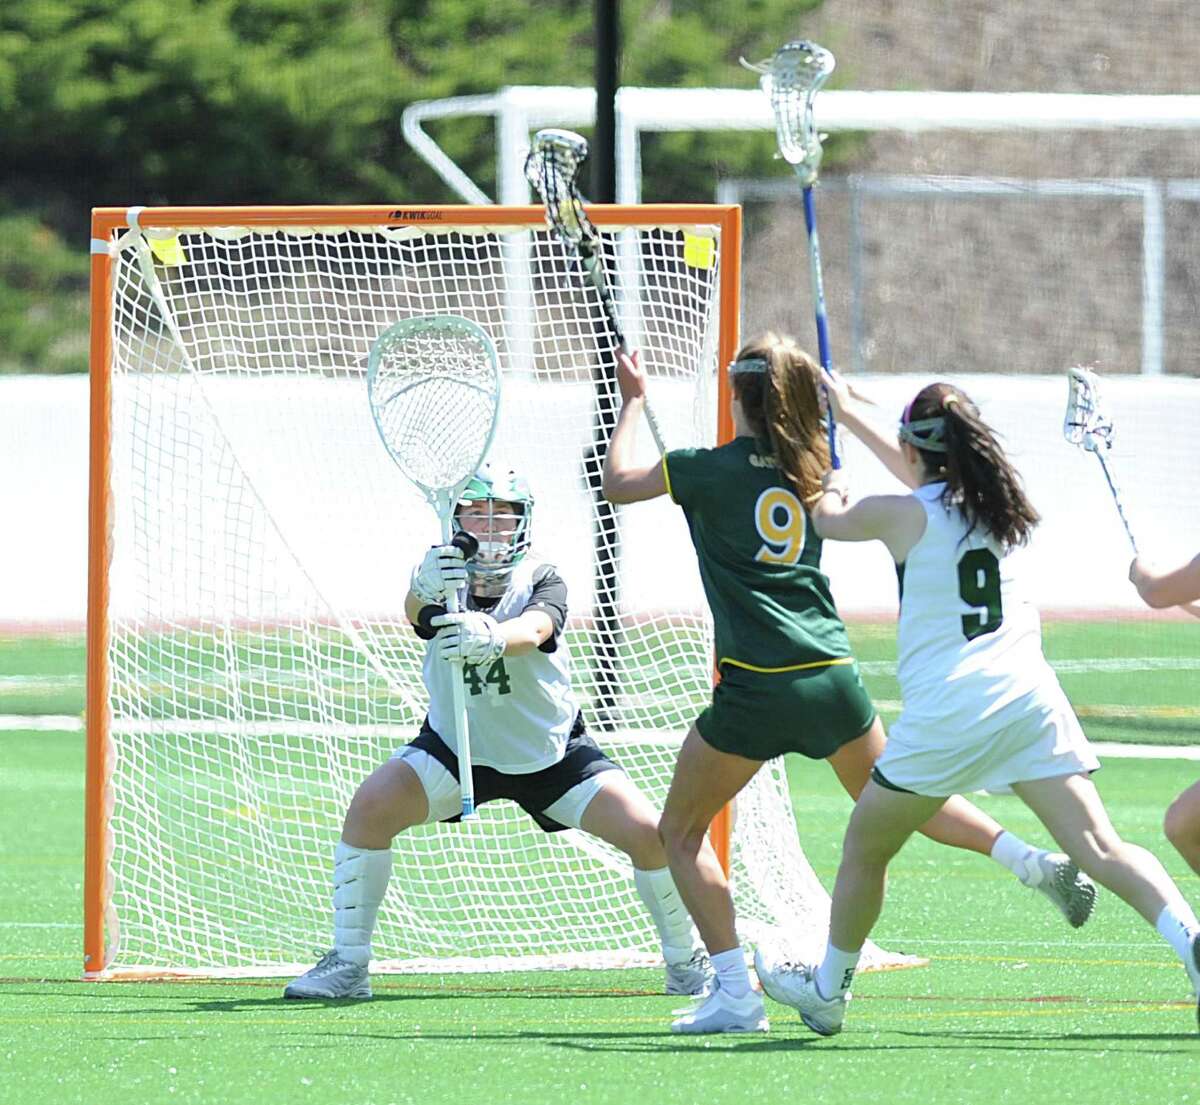 Goalie Maddie McLane returns as the last line of defense for the Sacred Heart lacrosse team.